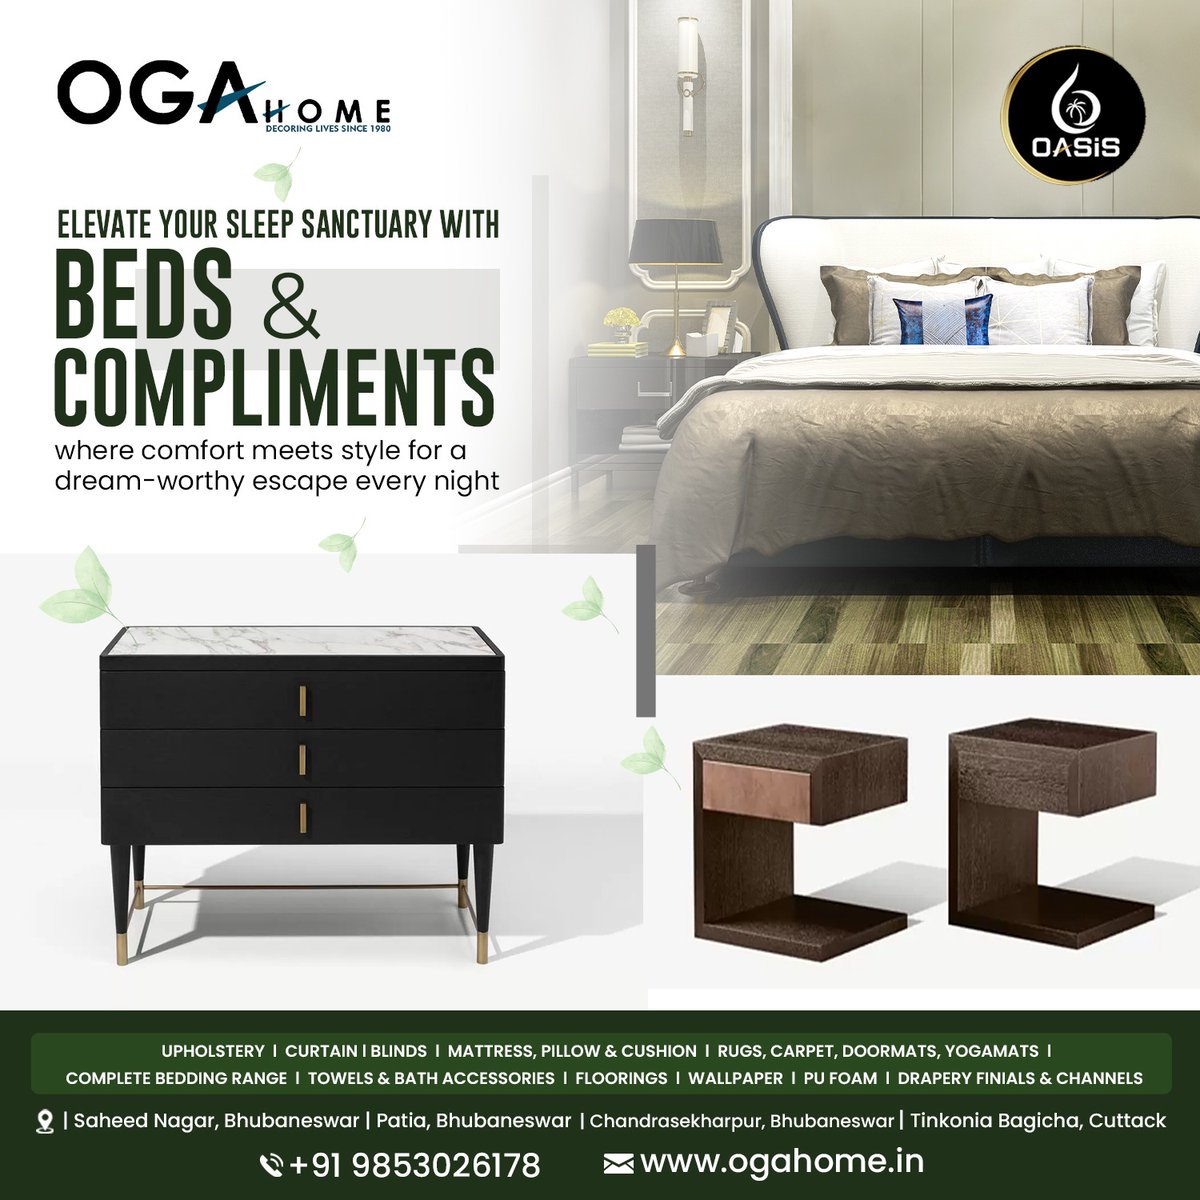 Transform your space with style! 📷📷 Explore the endless possibilities of home decor at OGA Home – where comfort meets chic. Your dream space awaits! Visit ogahome.in!!
#OGAHome #FurnishingDreams #SleepLikeRoyalty #OGAHome #Sleepables #CentuaryMattresses